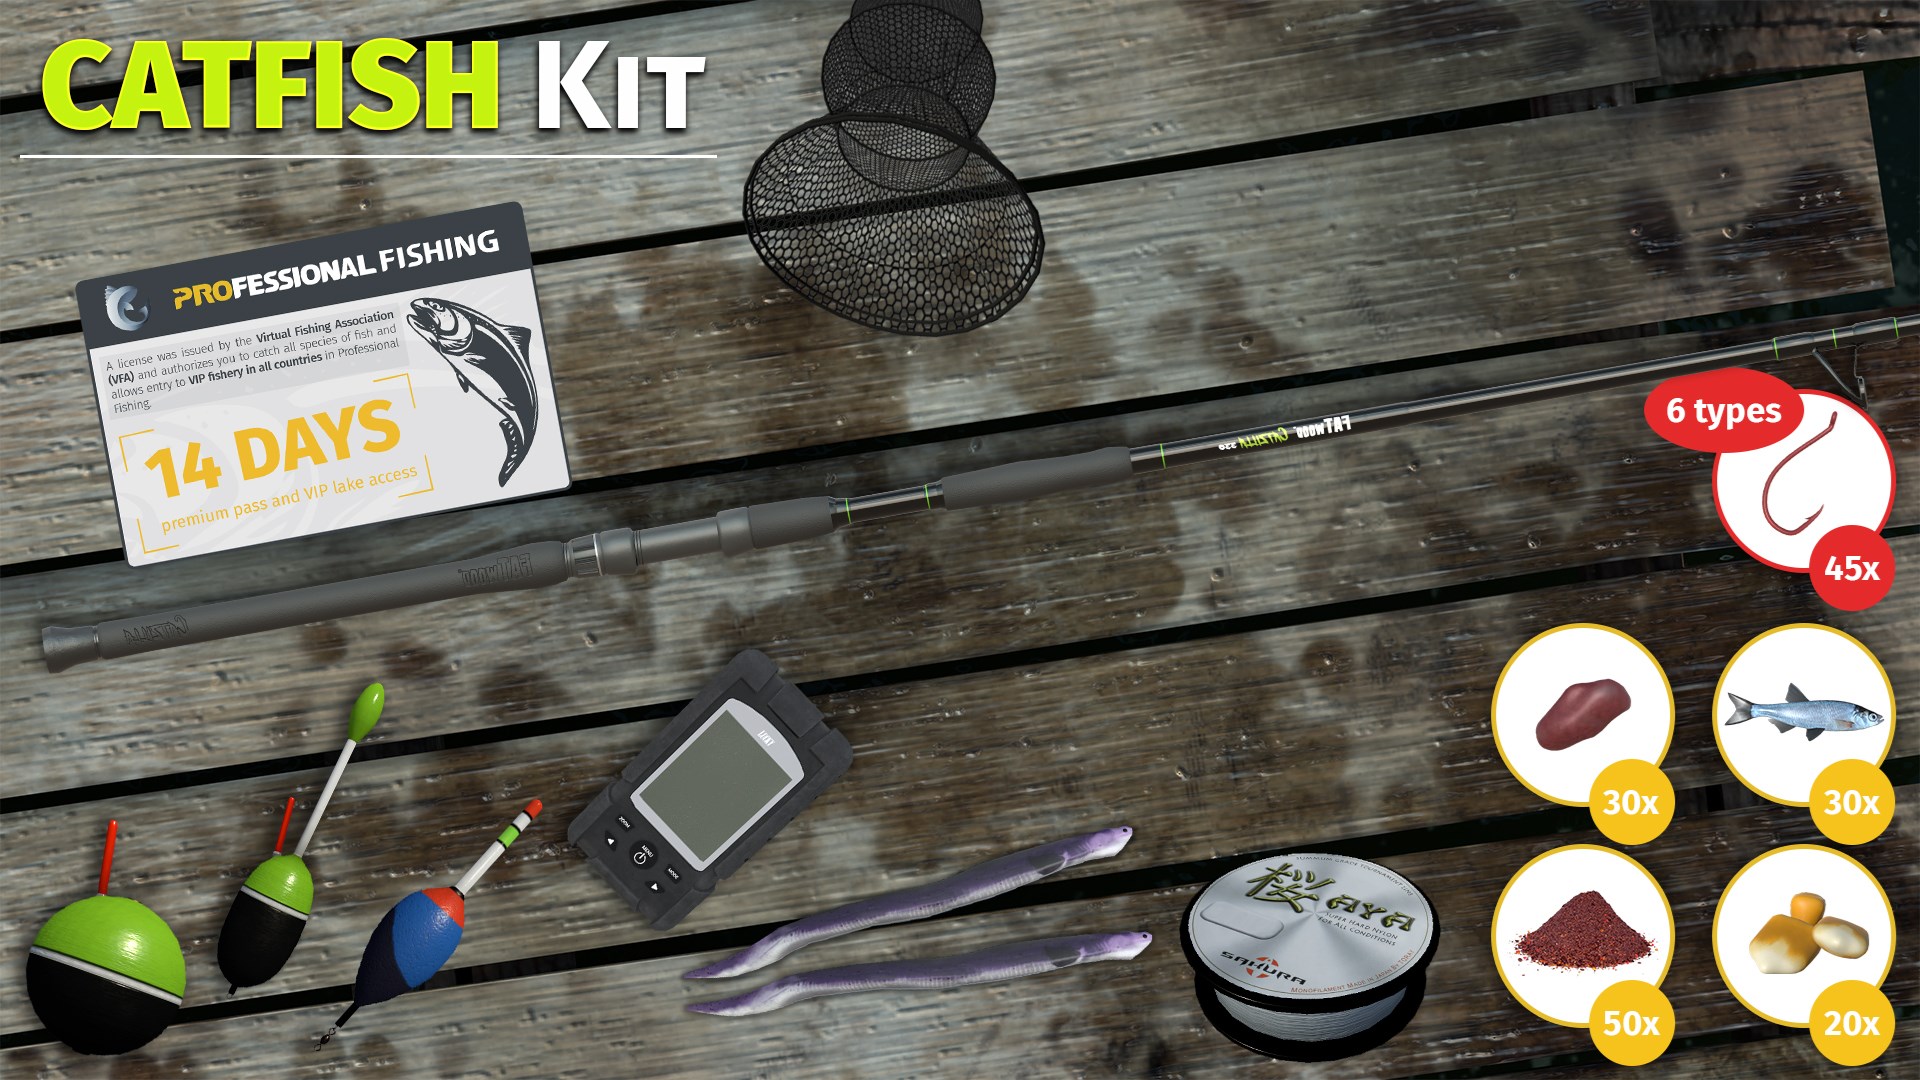 Buy Professional Fishing Catfish Kit (steam key) cheap, choose from  different sellers with different payment methods. Instant delivery.